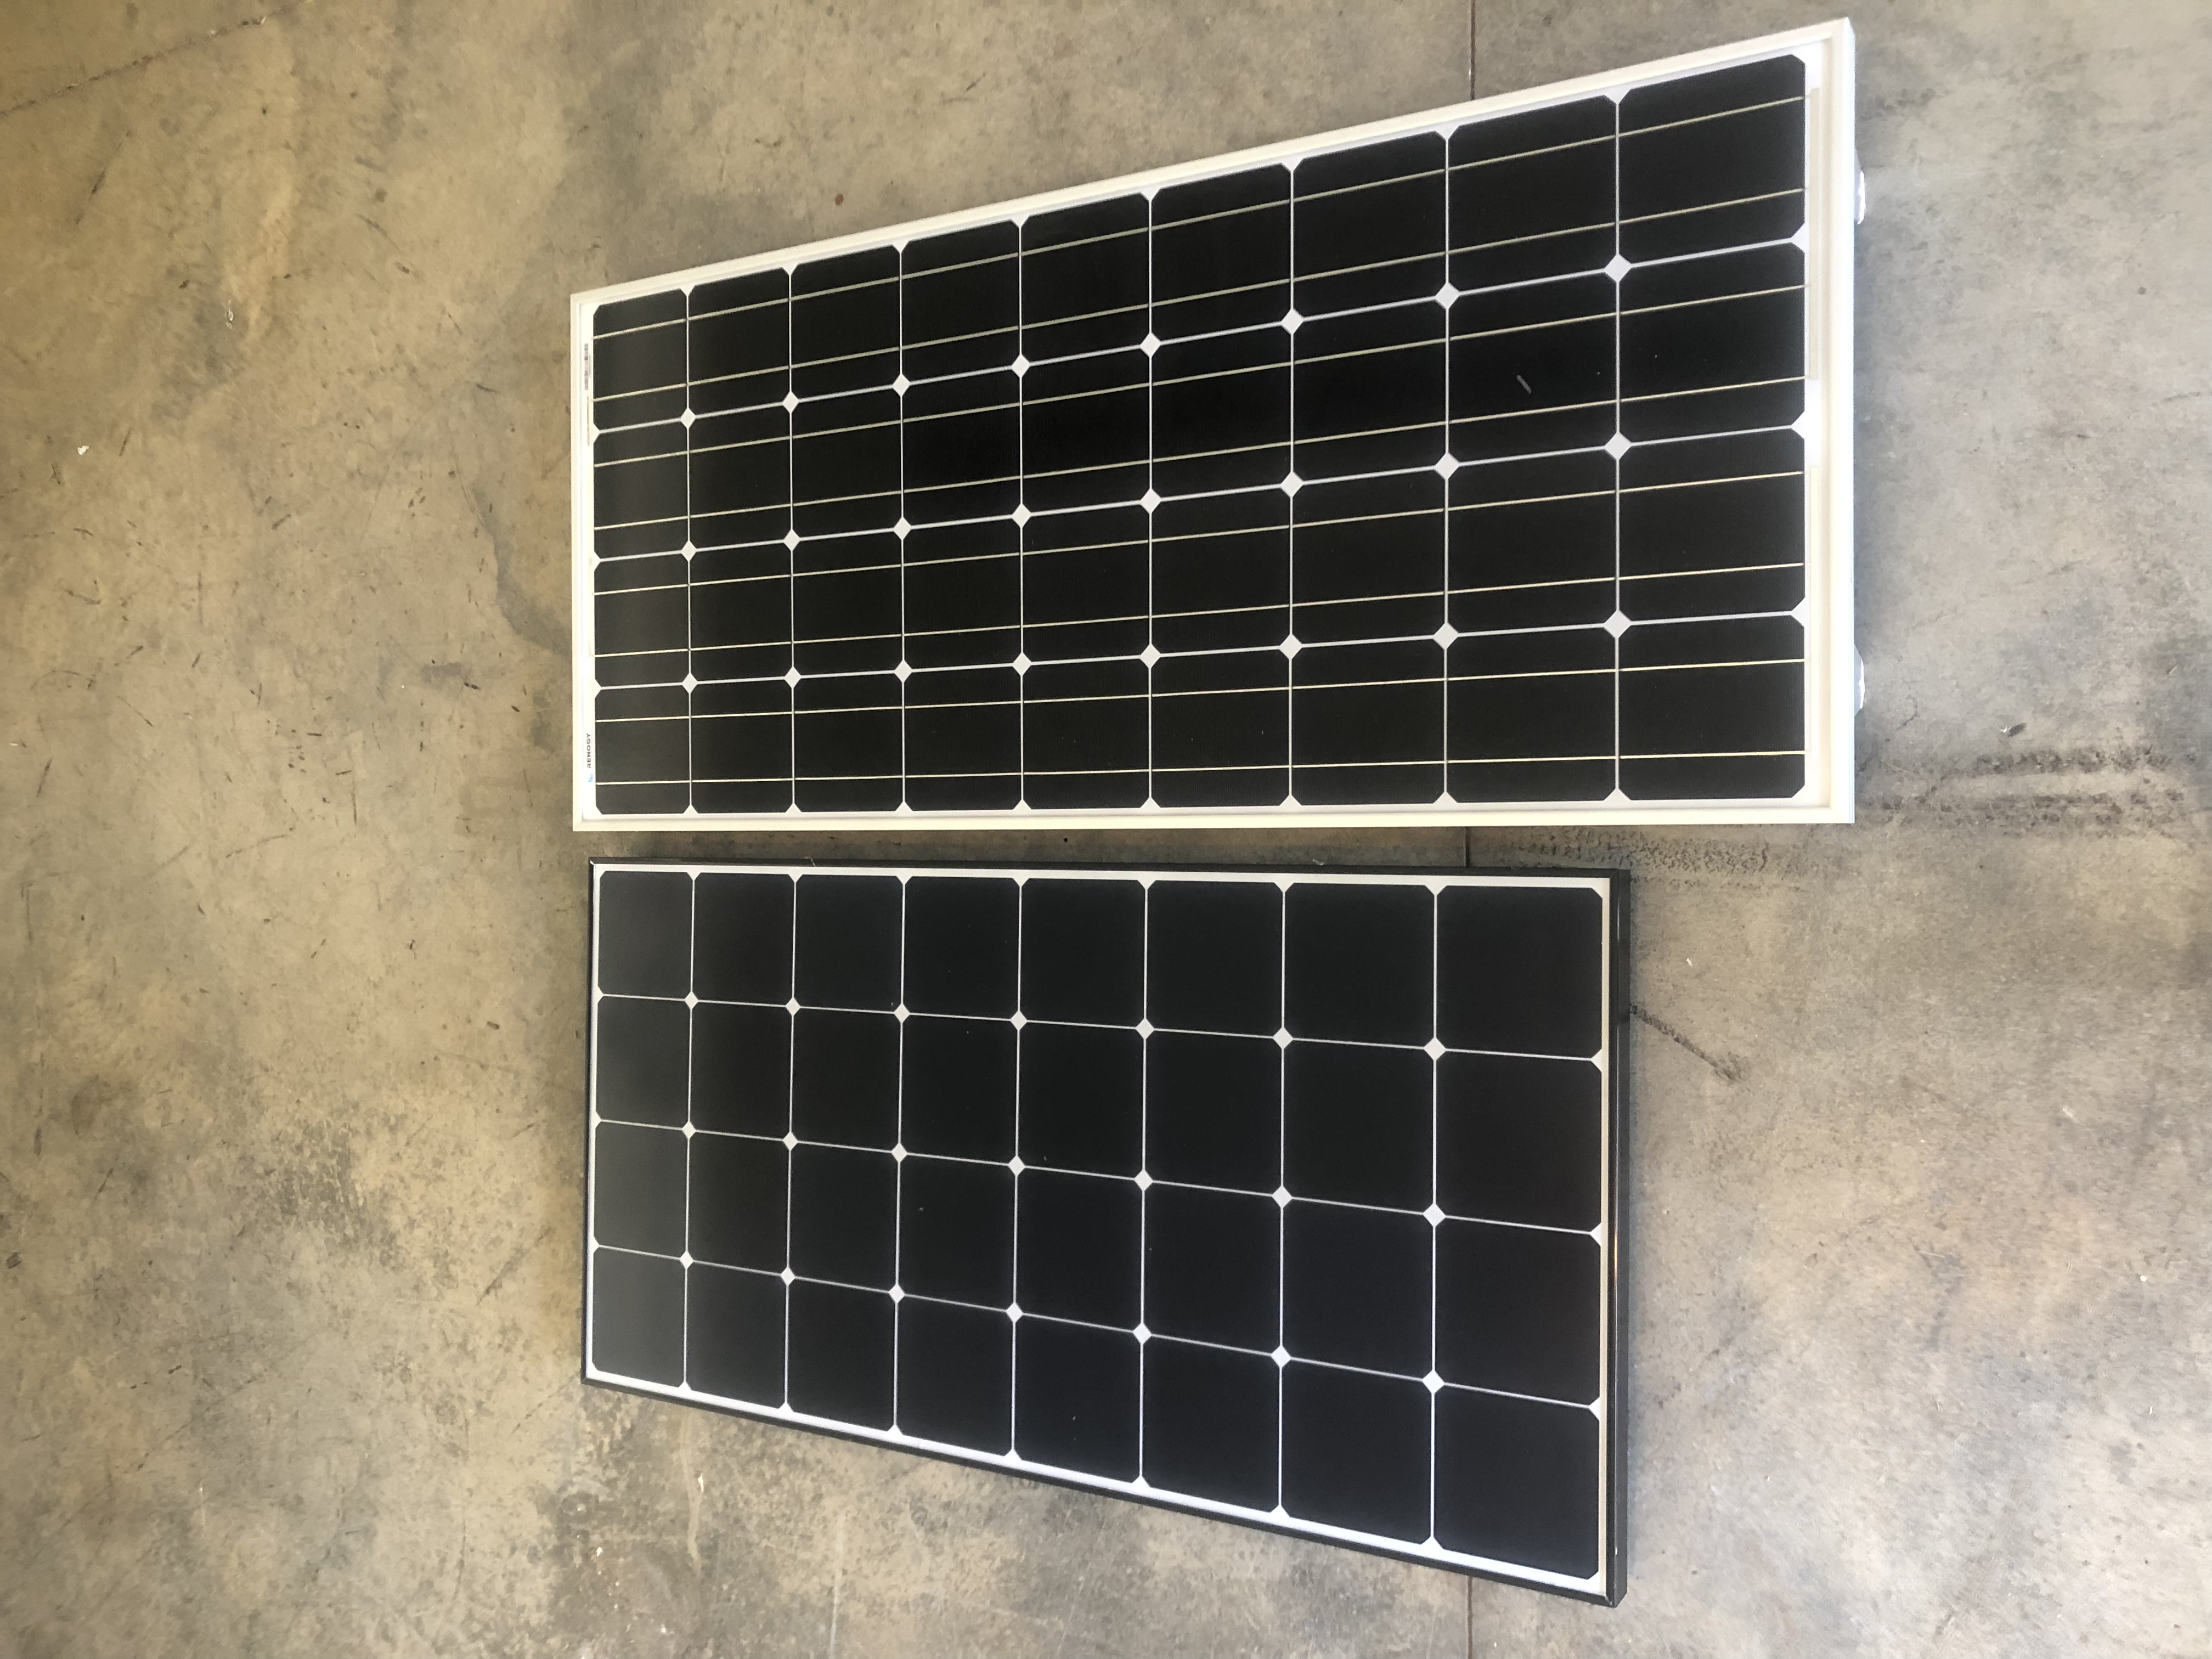 Both of these panels are Made by Renogy solar and are rated 100 watts, but they are very different in size. 